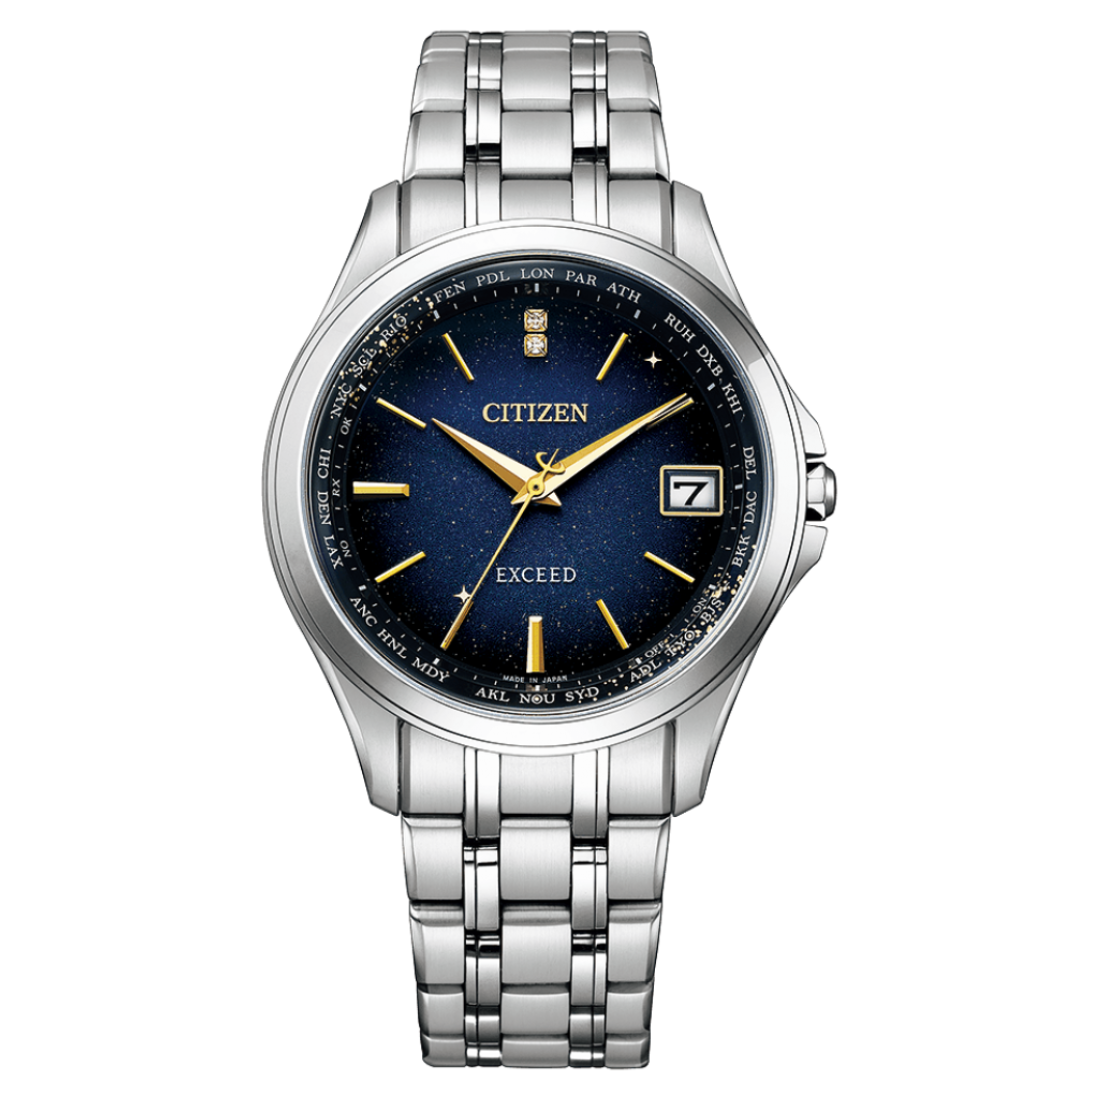 Citizen CB1080-61L Exceed Milky Way Limited Edition Midnight Blue Watch